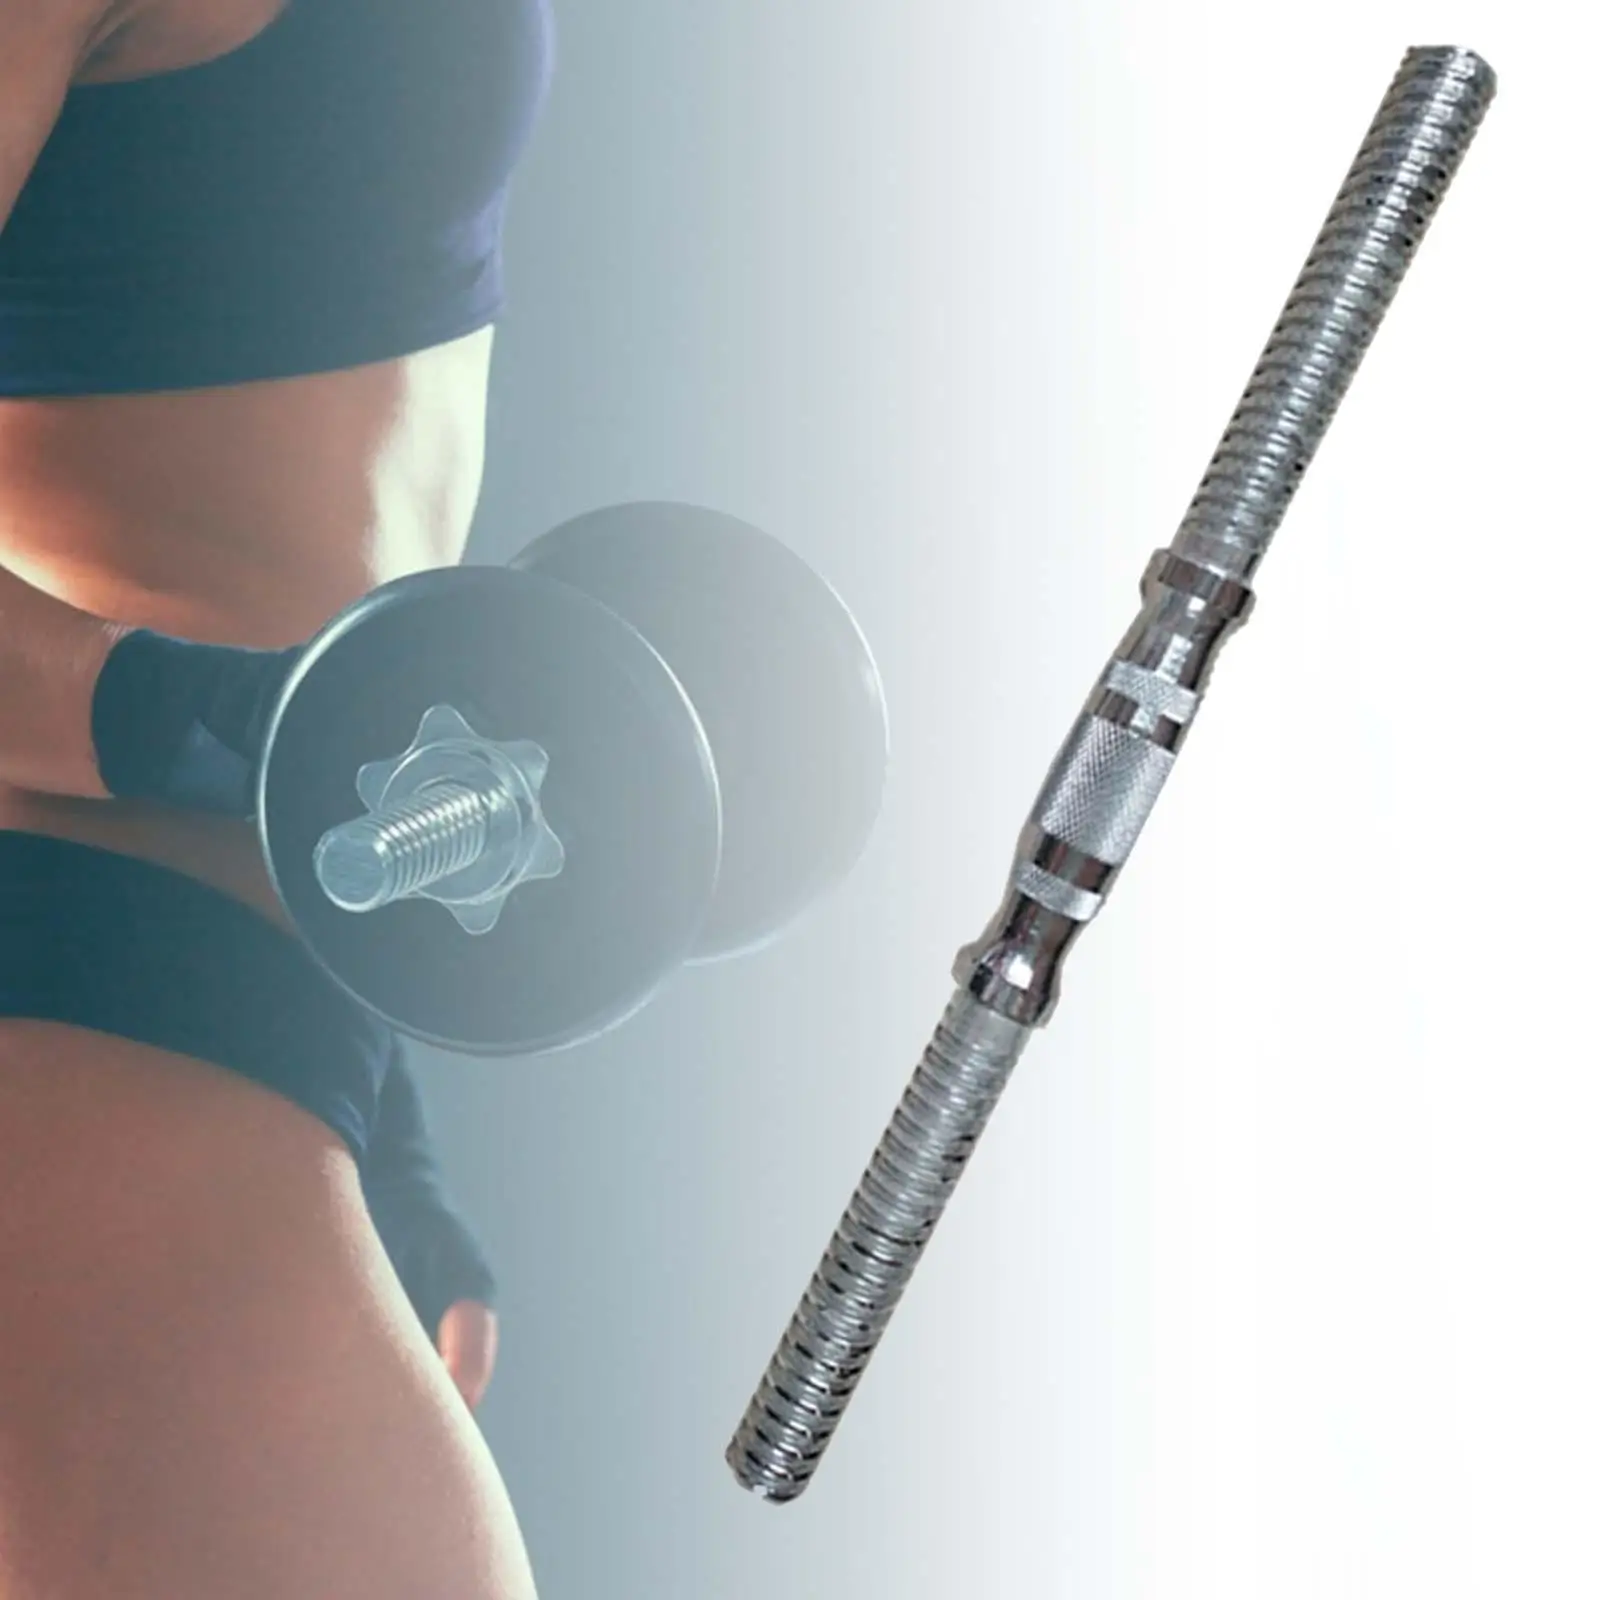 Dumbbell Bar Steel Fit 1 inch Standard Weight Plates Barbell Handle for Fitness Equipment Sport Gym Exercise Strength Training